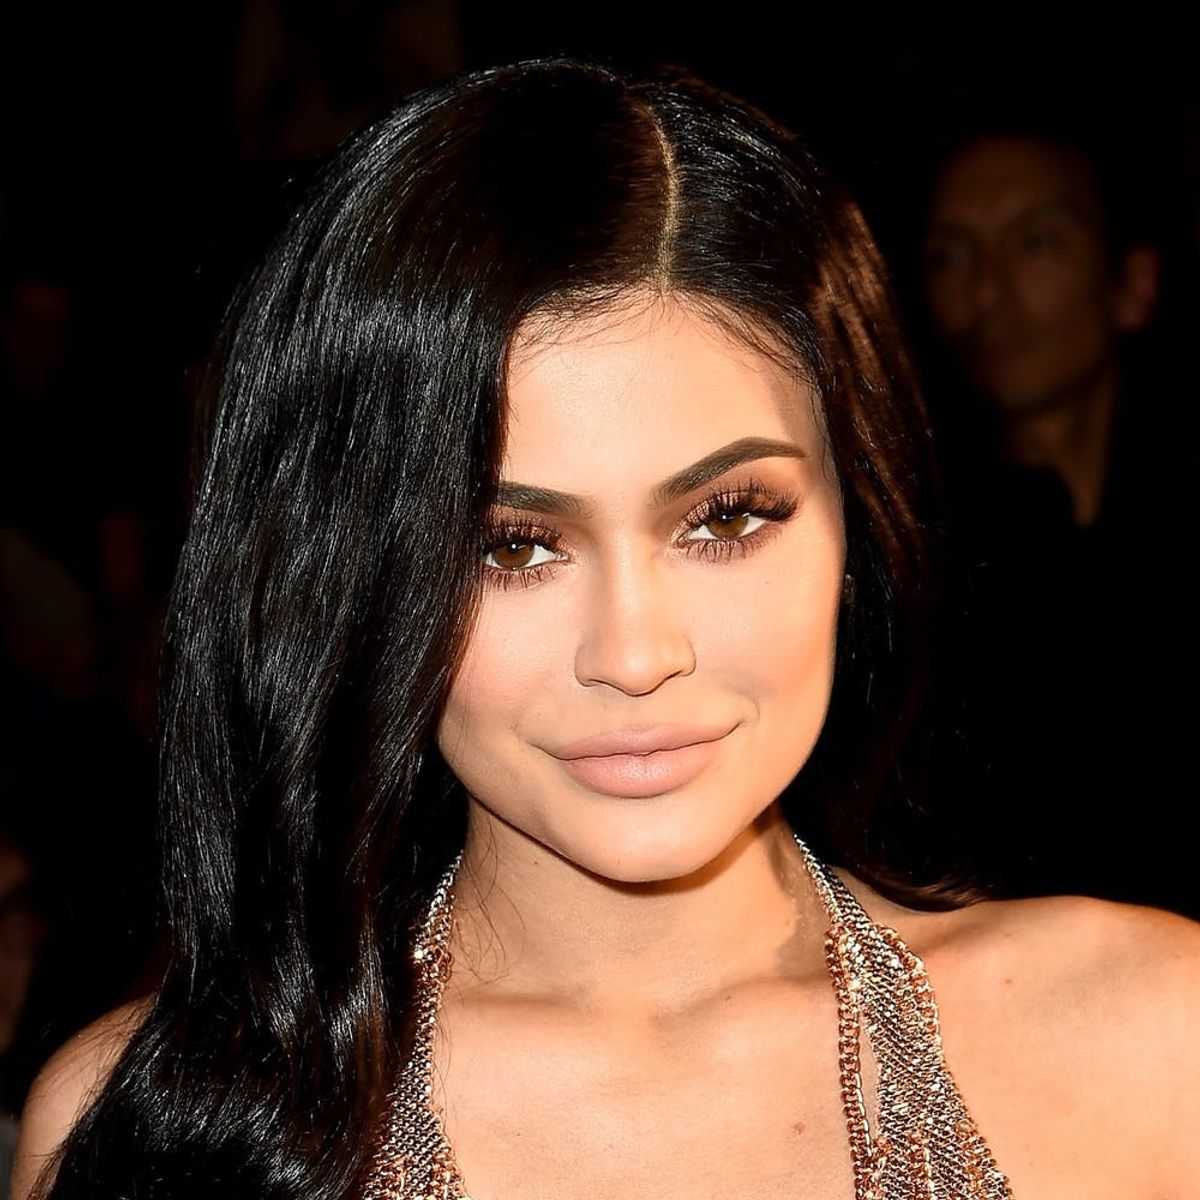 Twitter’s Reaction to Kylie Jenner’s Reported Pregnancy Is Pure Internet Gold